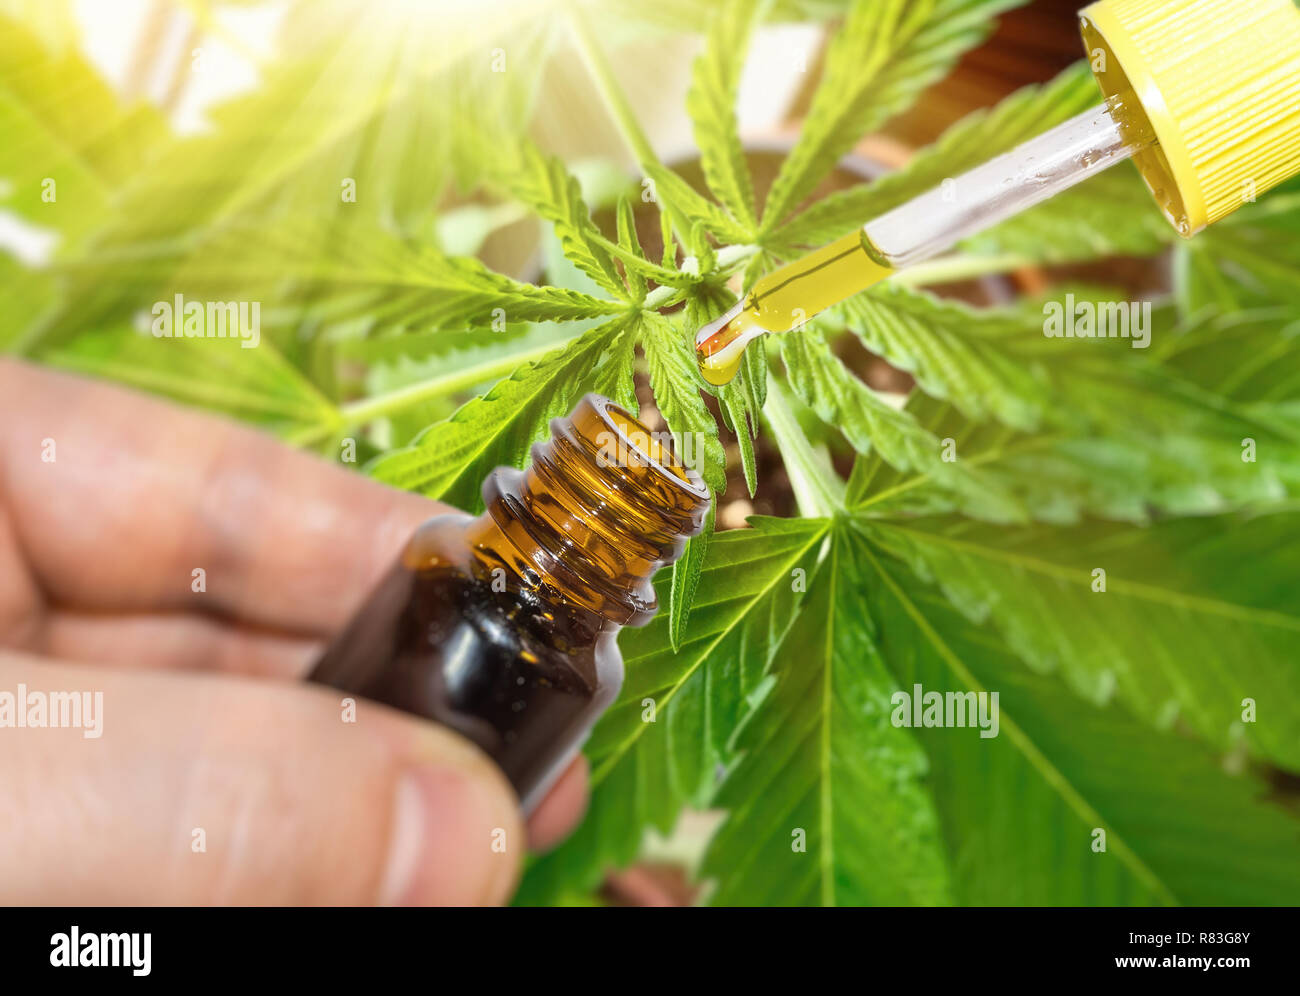 Pipette with Cannabis oil against Marijuana plant Stock Photo